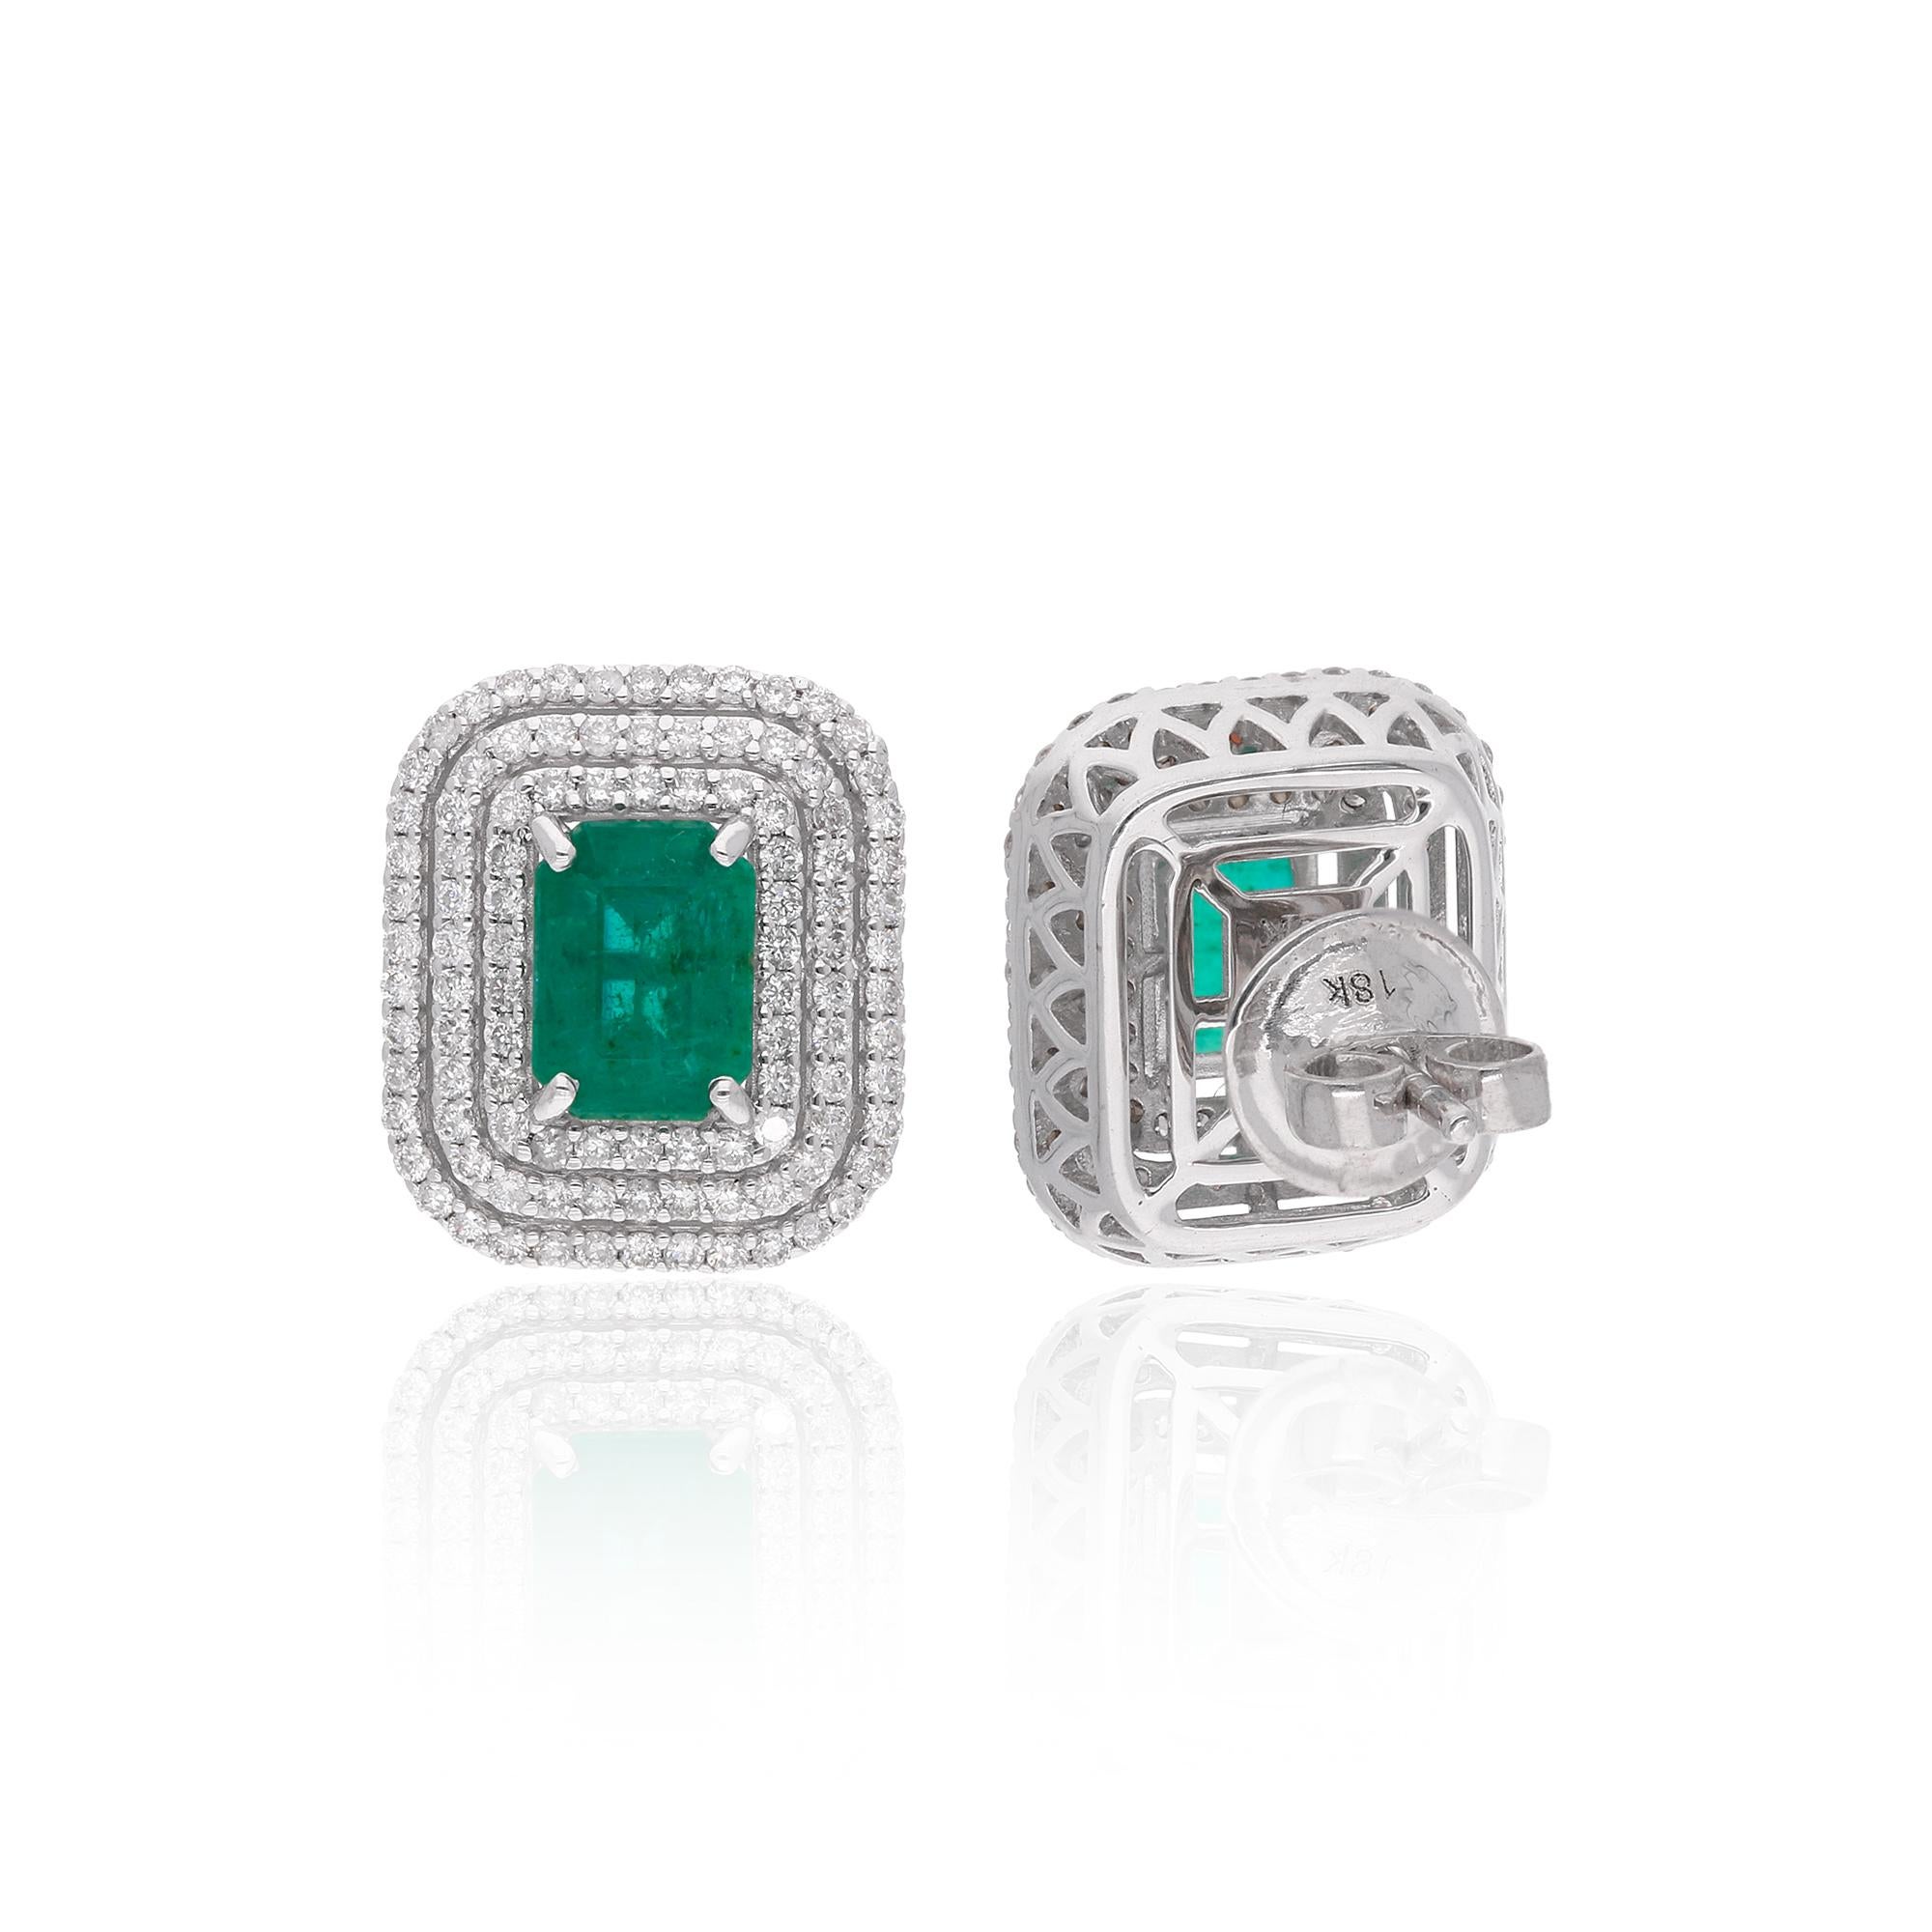 Item Code :- SEE-1416E
Gross Wt. :- 6.02 gm
18k White Gold Wt. :- 5.50 gm
Natural Diamond Wt. :- 0.83 Ct. ( AVERAGE DIAMOND CLARITY SI1-SI2 & COLOR H-I )
Zambian Emerald Wt. :- 1.79 Ct.
Earrings Size :- 13 x 15 mm approx.

✦